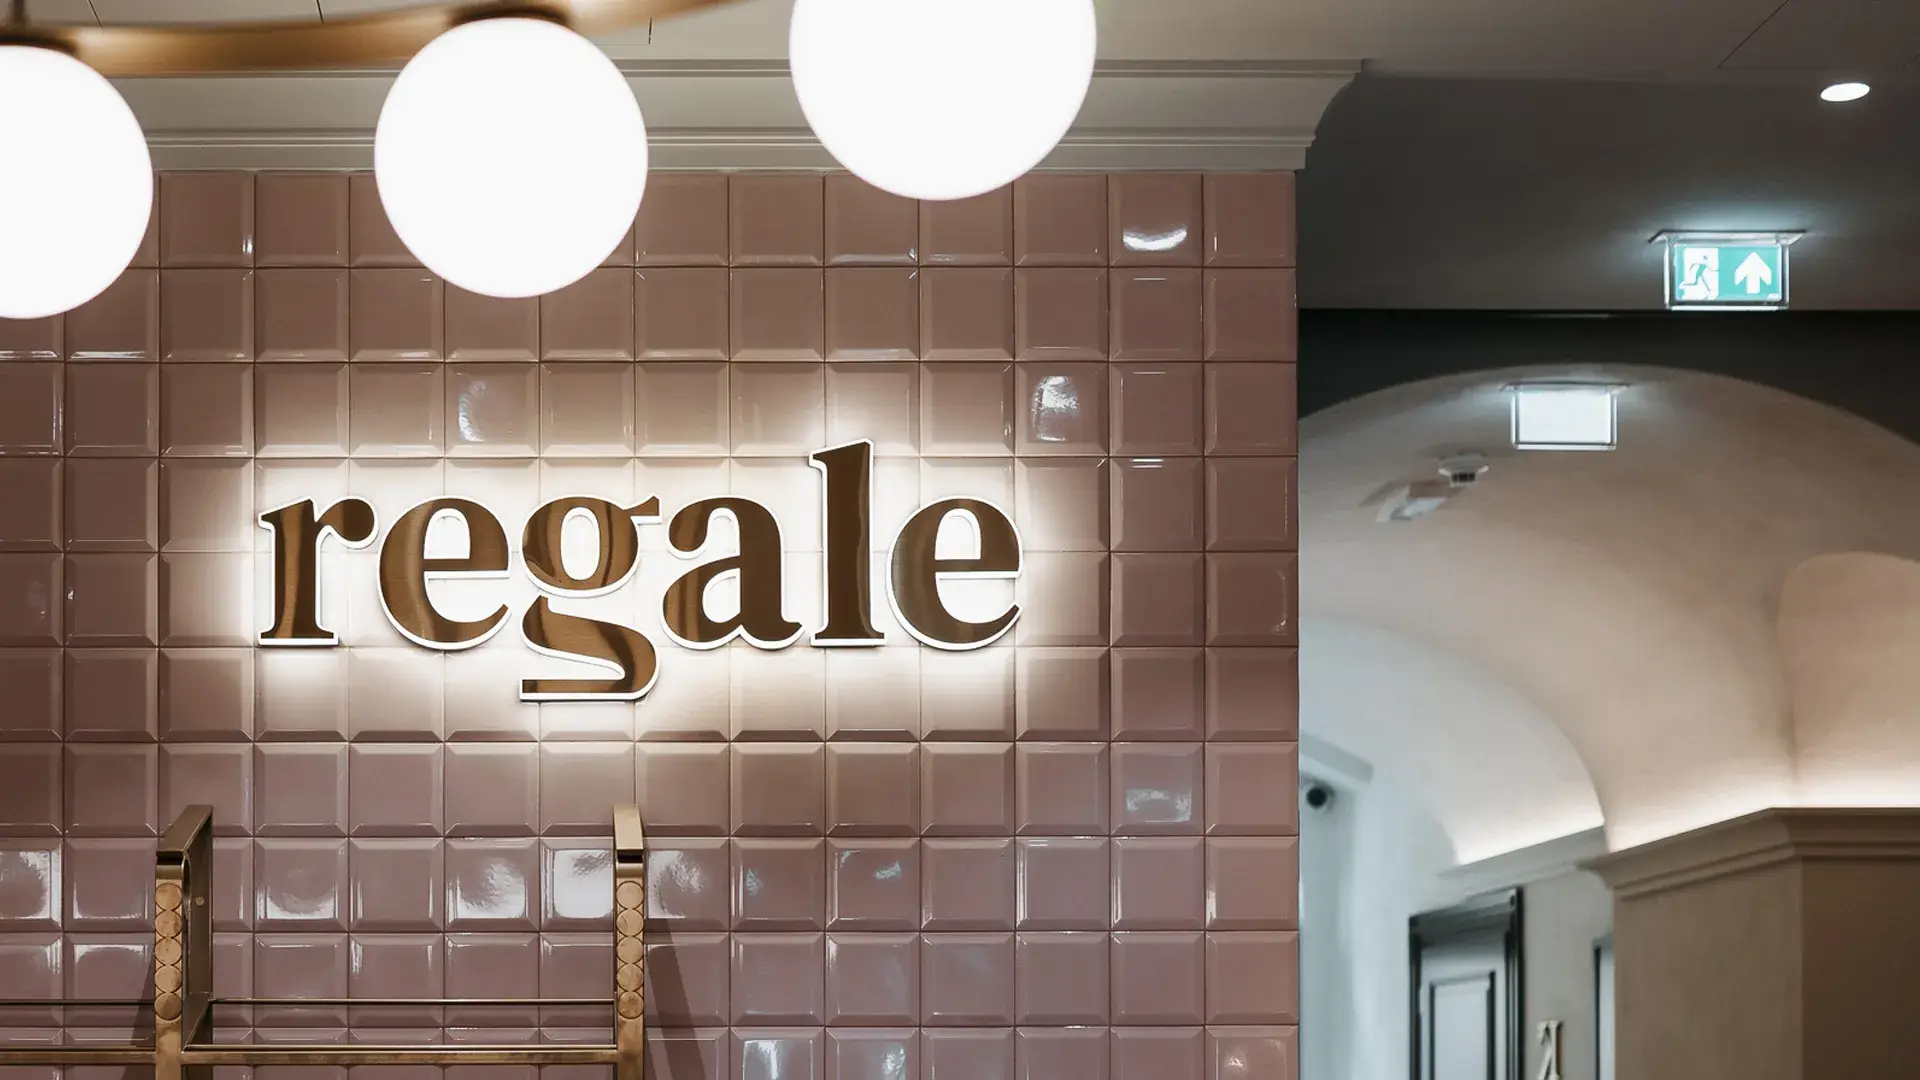 LED letters illuminating the side of Regale